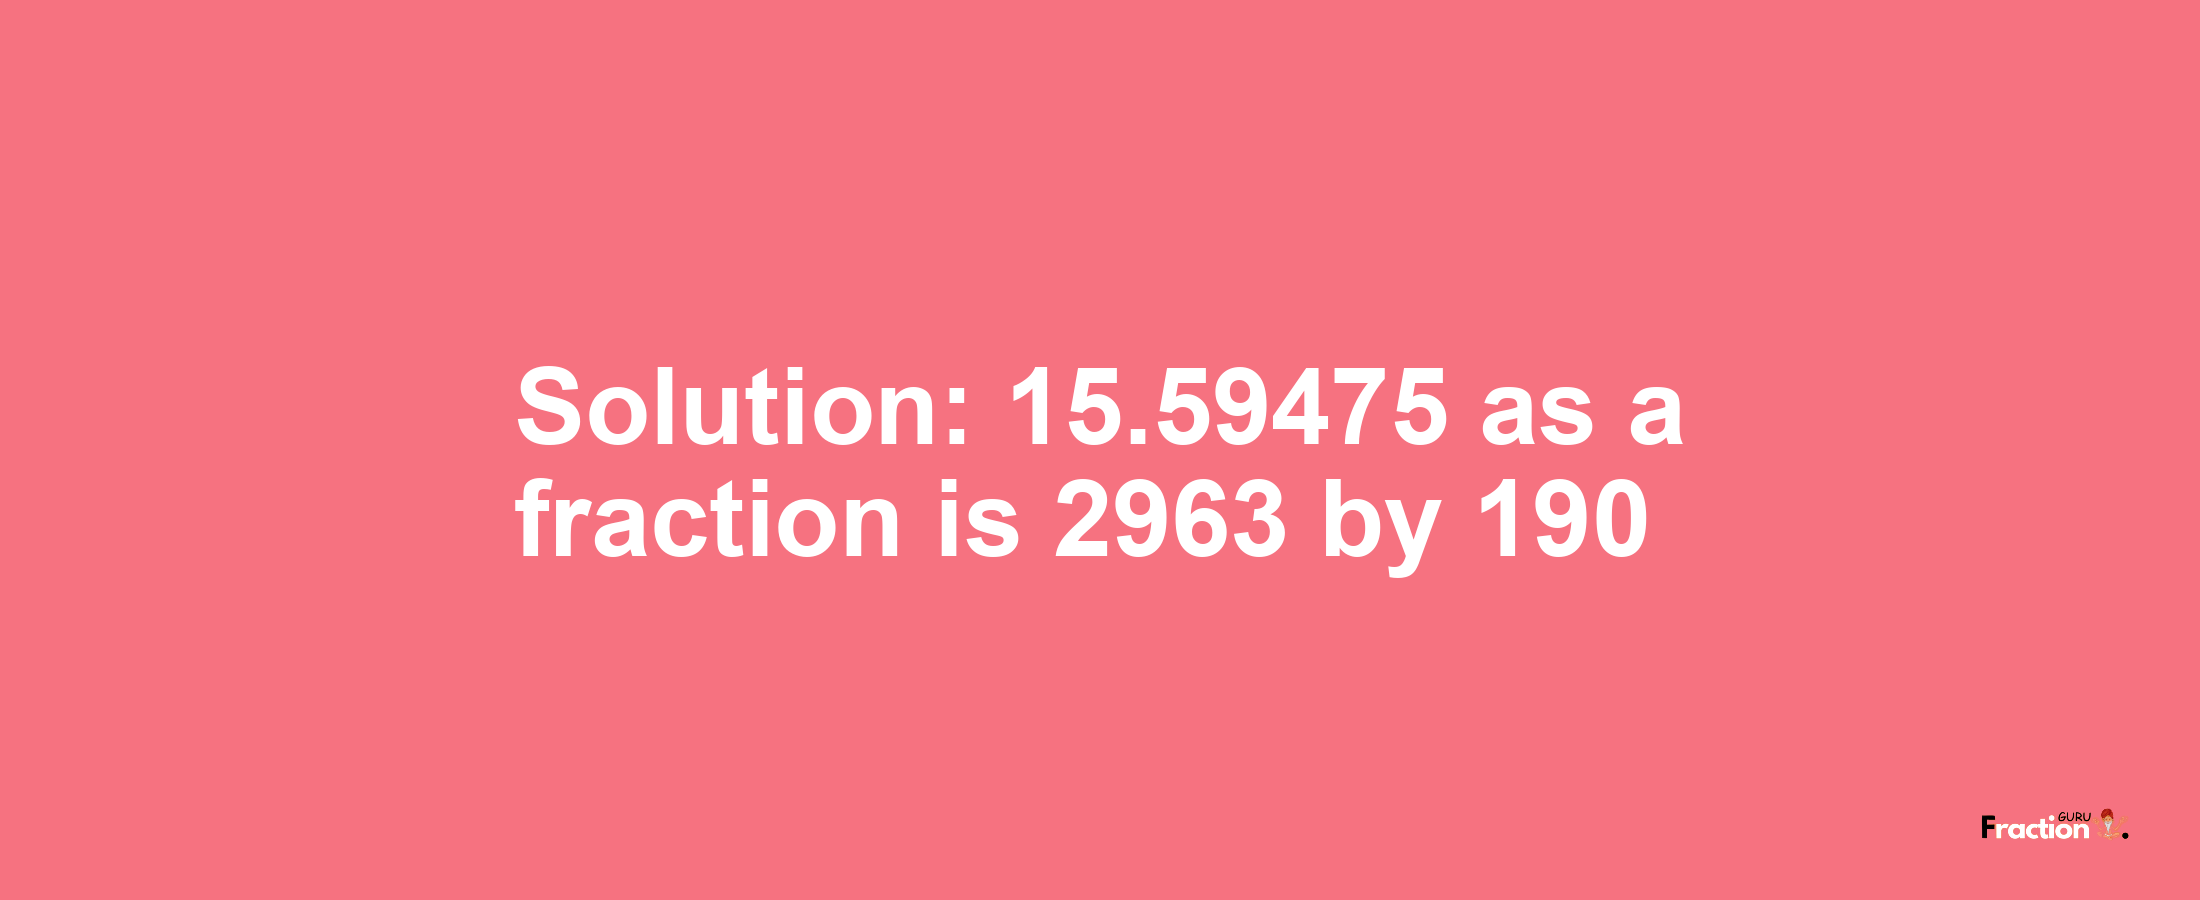 Solution:15.59475 as a fraction is 2963/190